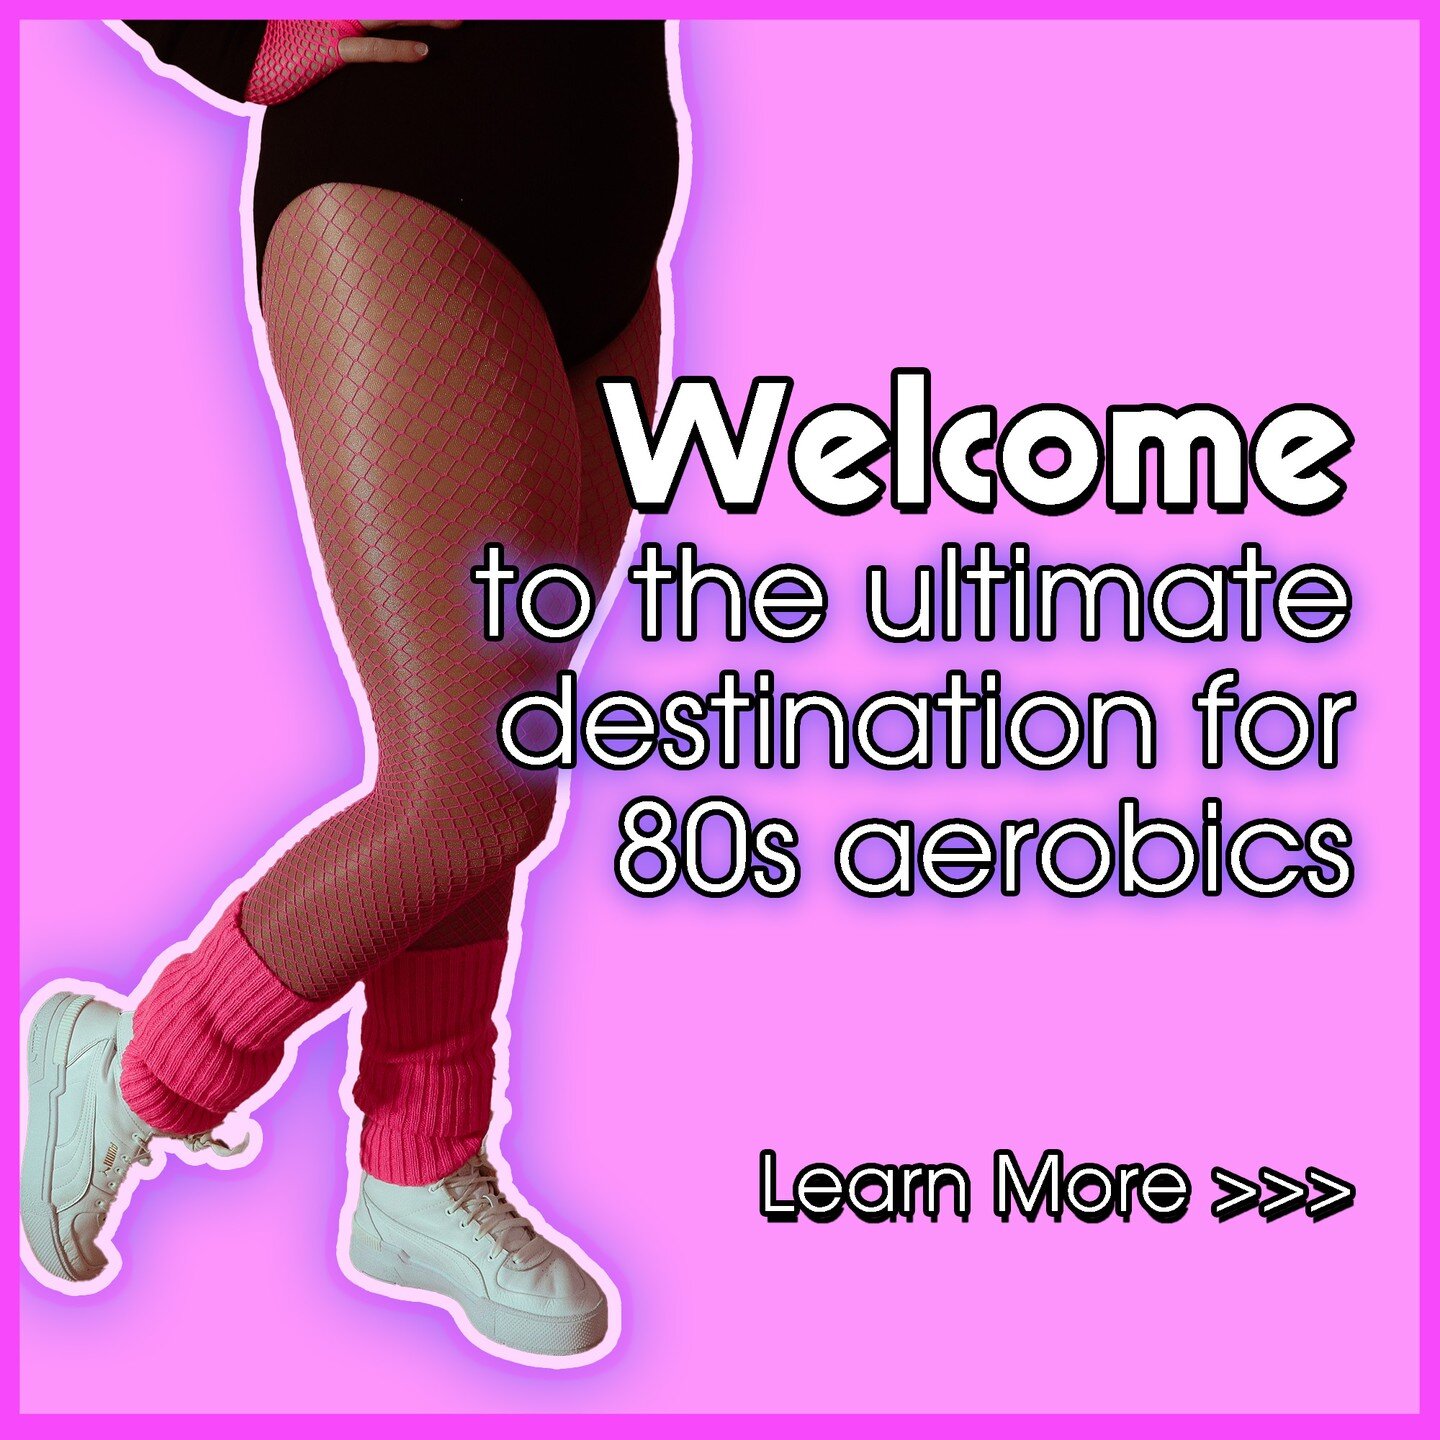 Want to make your workouts fun?

You've landed in the right place!

With The Aerobics Channel's fun 80s aerobics inspired workouts you can:

❤️ Make your cardio workouts fun - so you'll stay consistent
❤️ Ditch the gym membership and get fit at home 